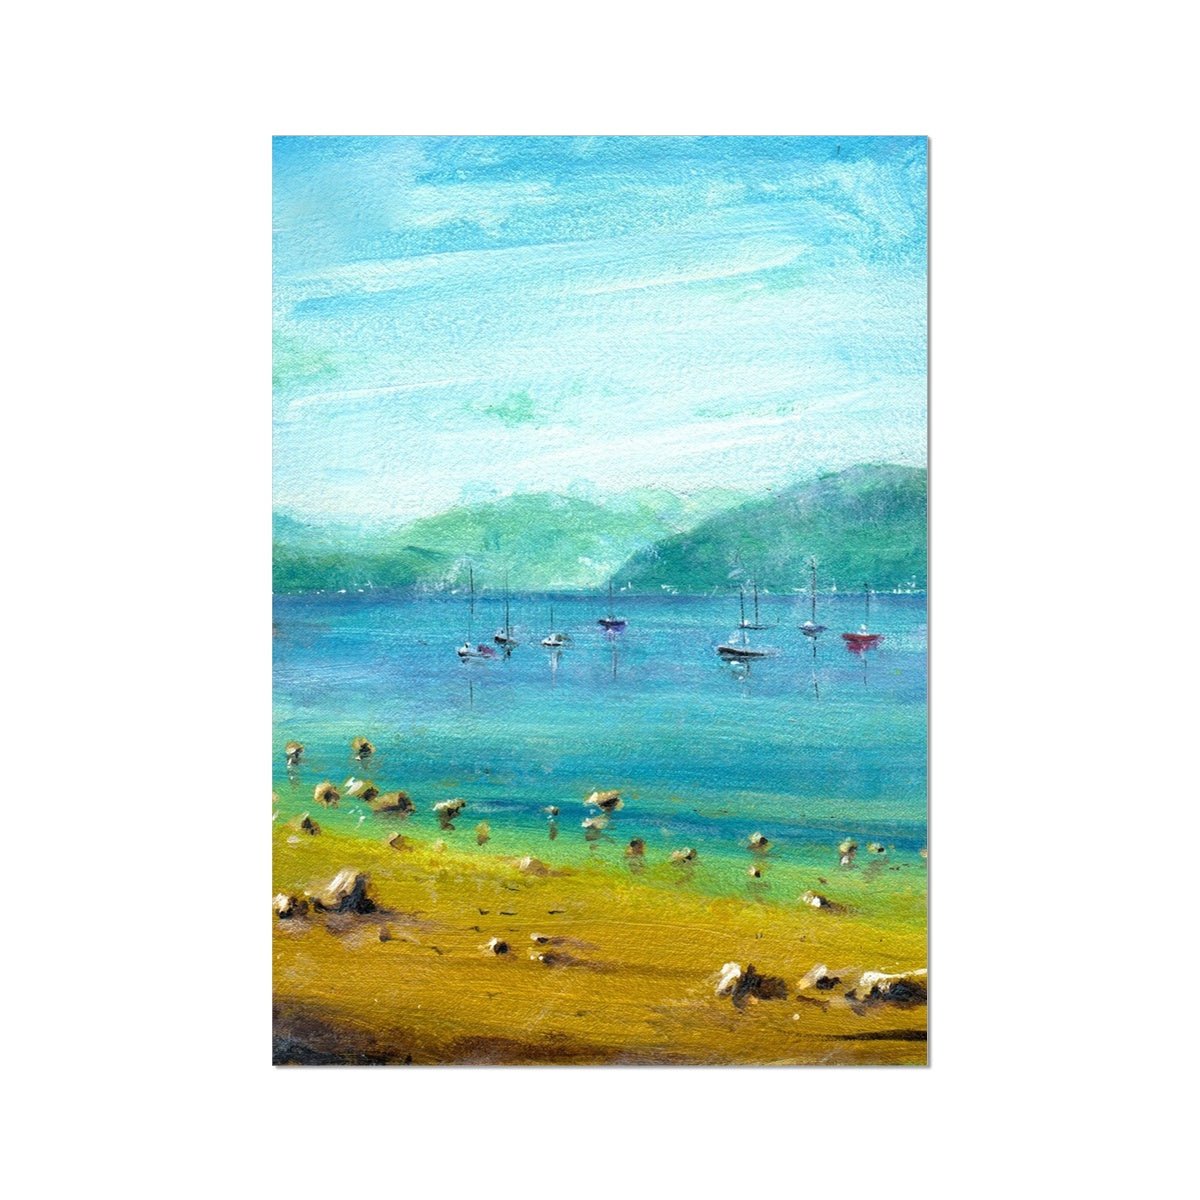 A Summer Day On The Clyde Painting | Fine Art Prints From Scotland-Unframed Prints-River Clyde Art Gallery-A2 Portrait-Paintings, Prints, Homeware, Art Gifts From Scotland By Scottish Artist Kevin Hunter